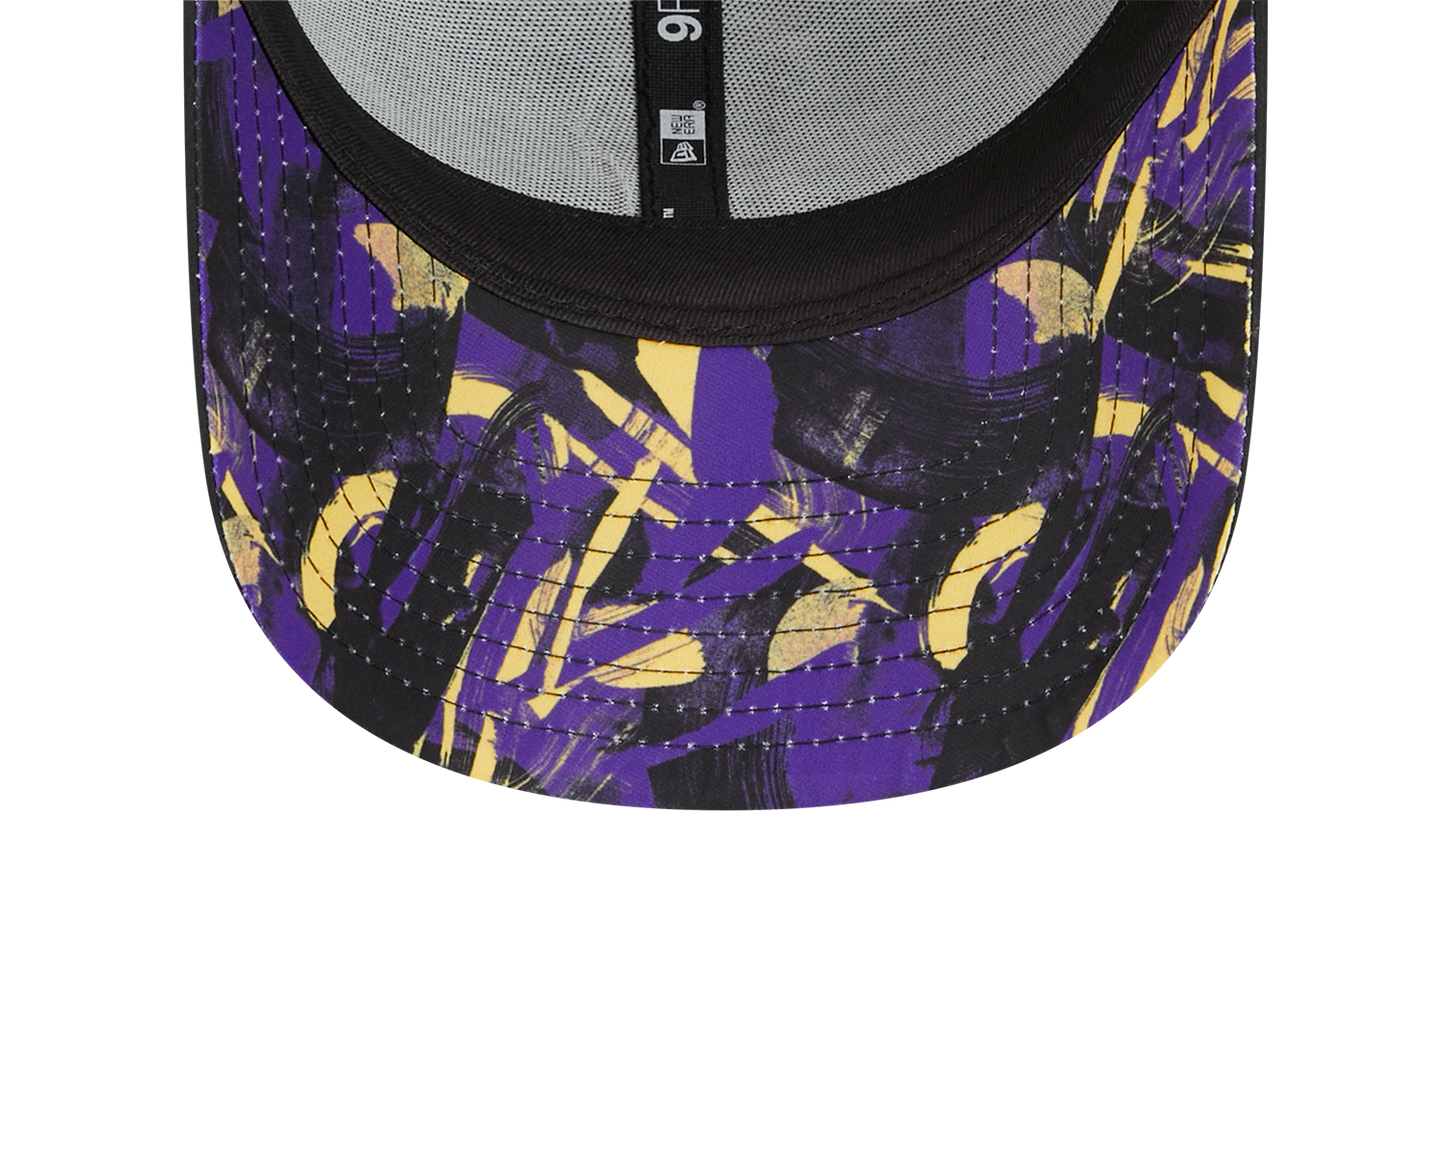 NEW ERA CAP LOS ANGELES LAKERS 9FORTY